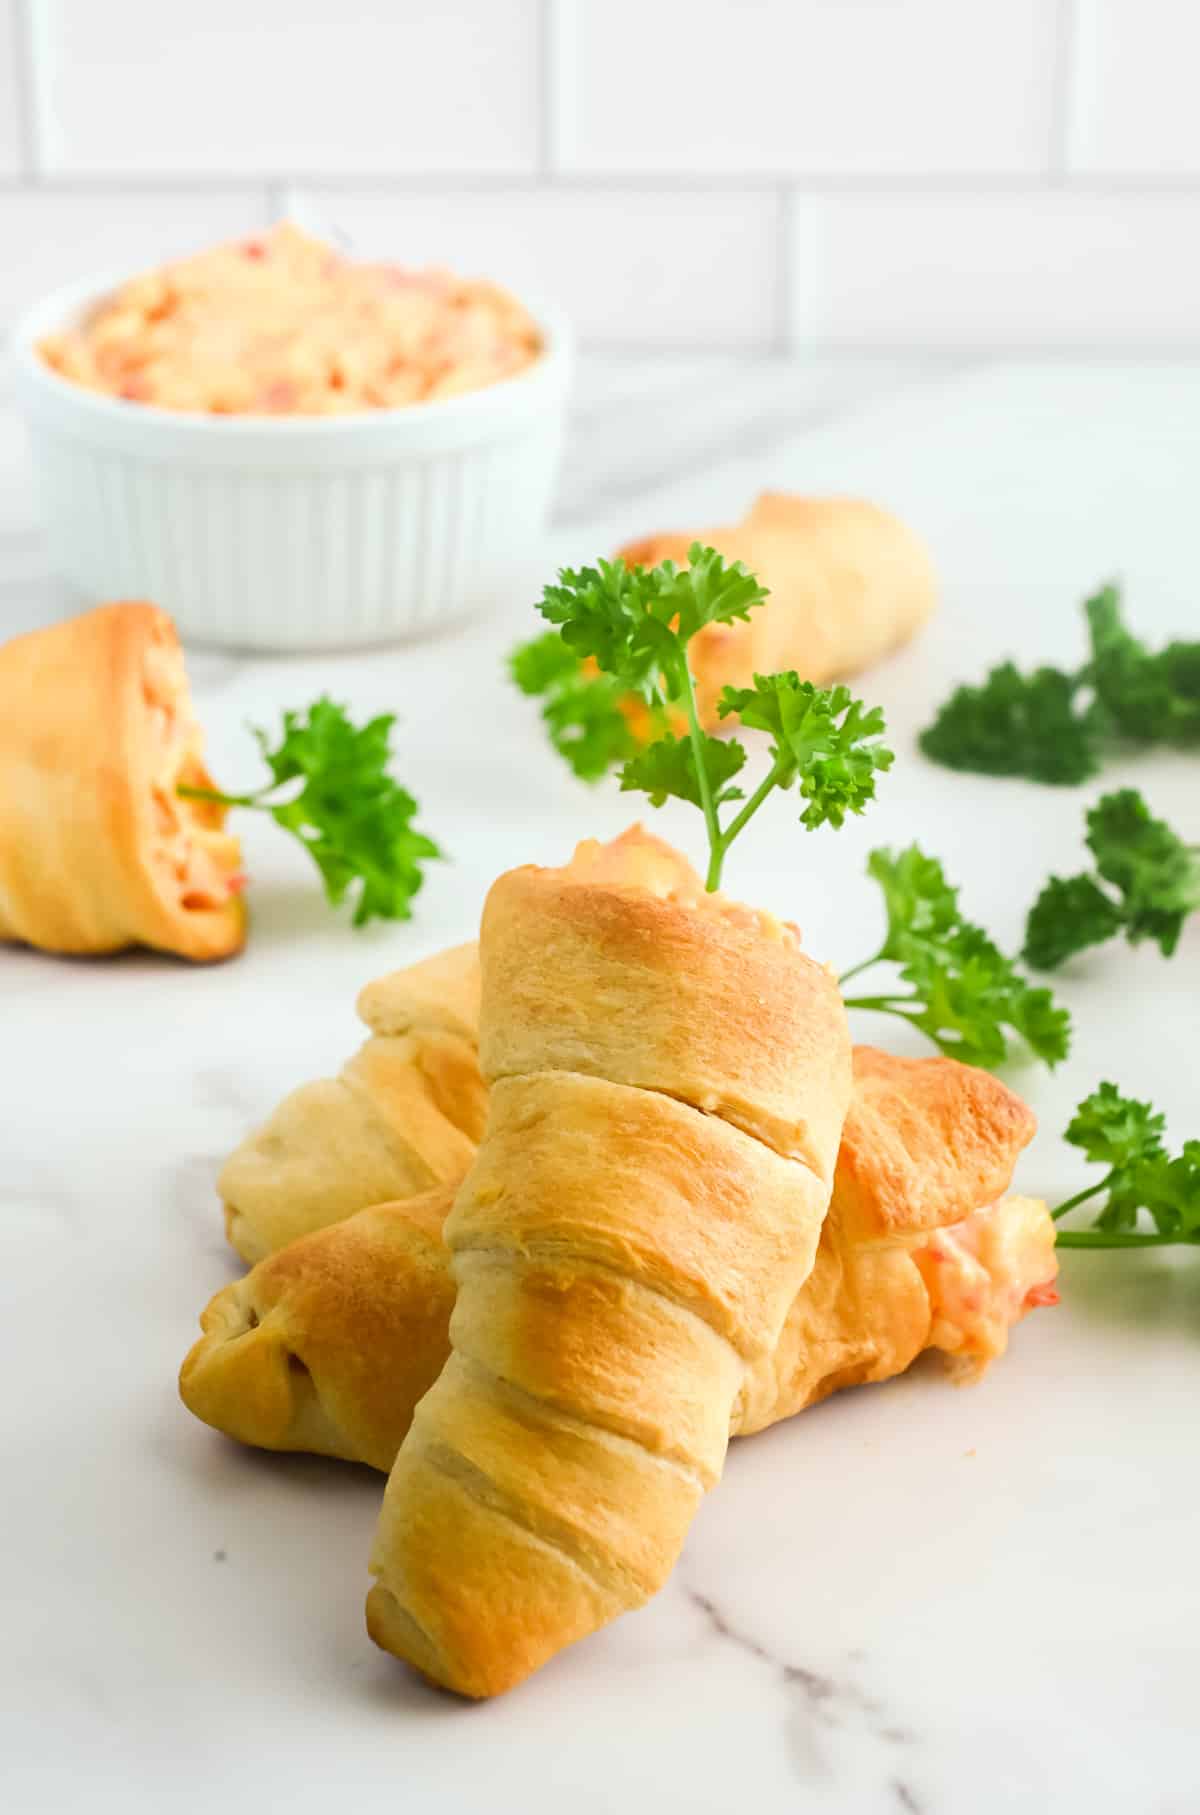 Cheesy crescent rolls with parsley shaped like carrots on a marble counter.